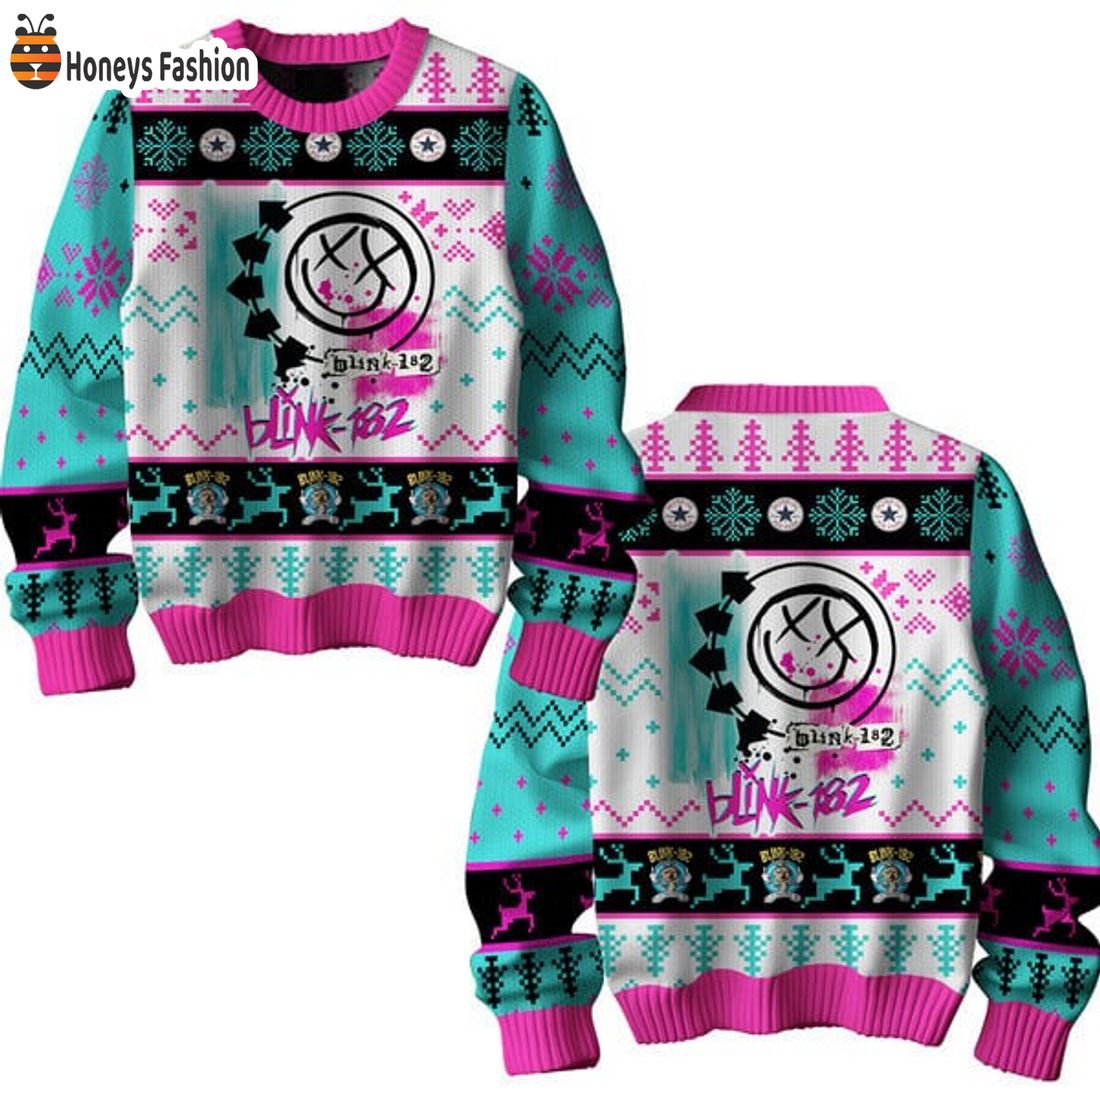 Blink-182 Pop Punk Band Ugly Christmas Sweater